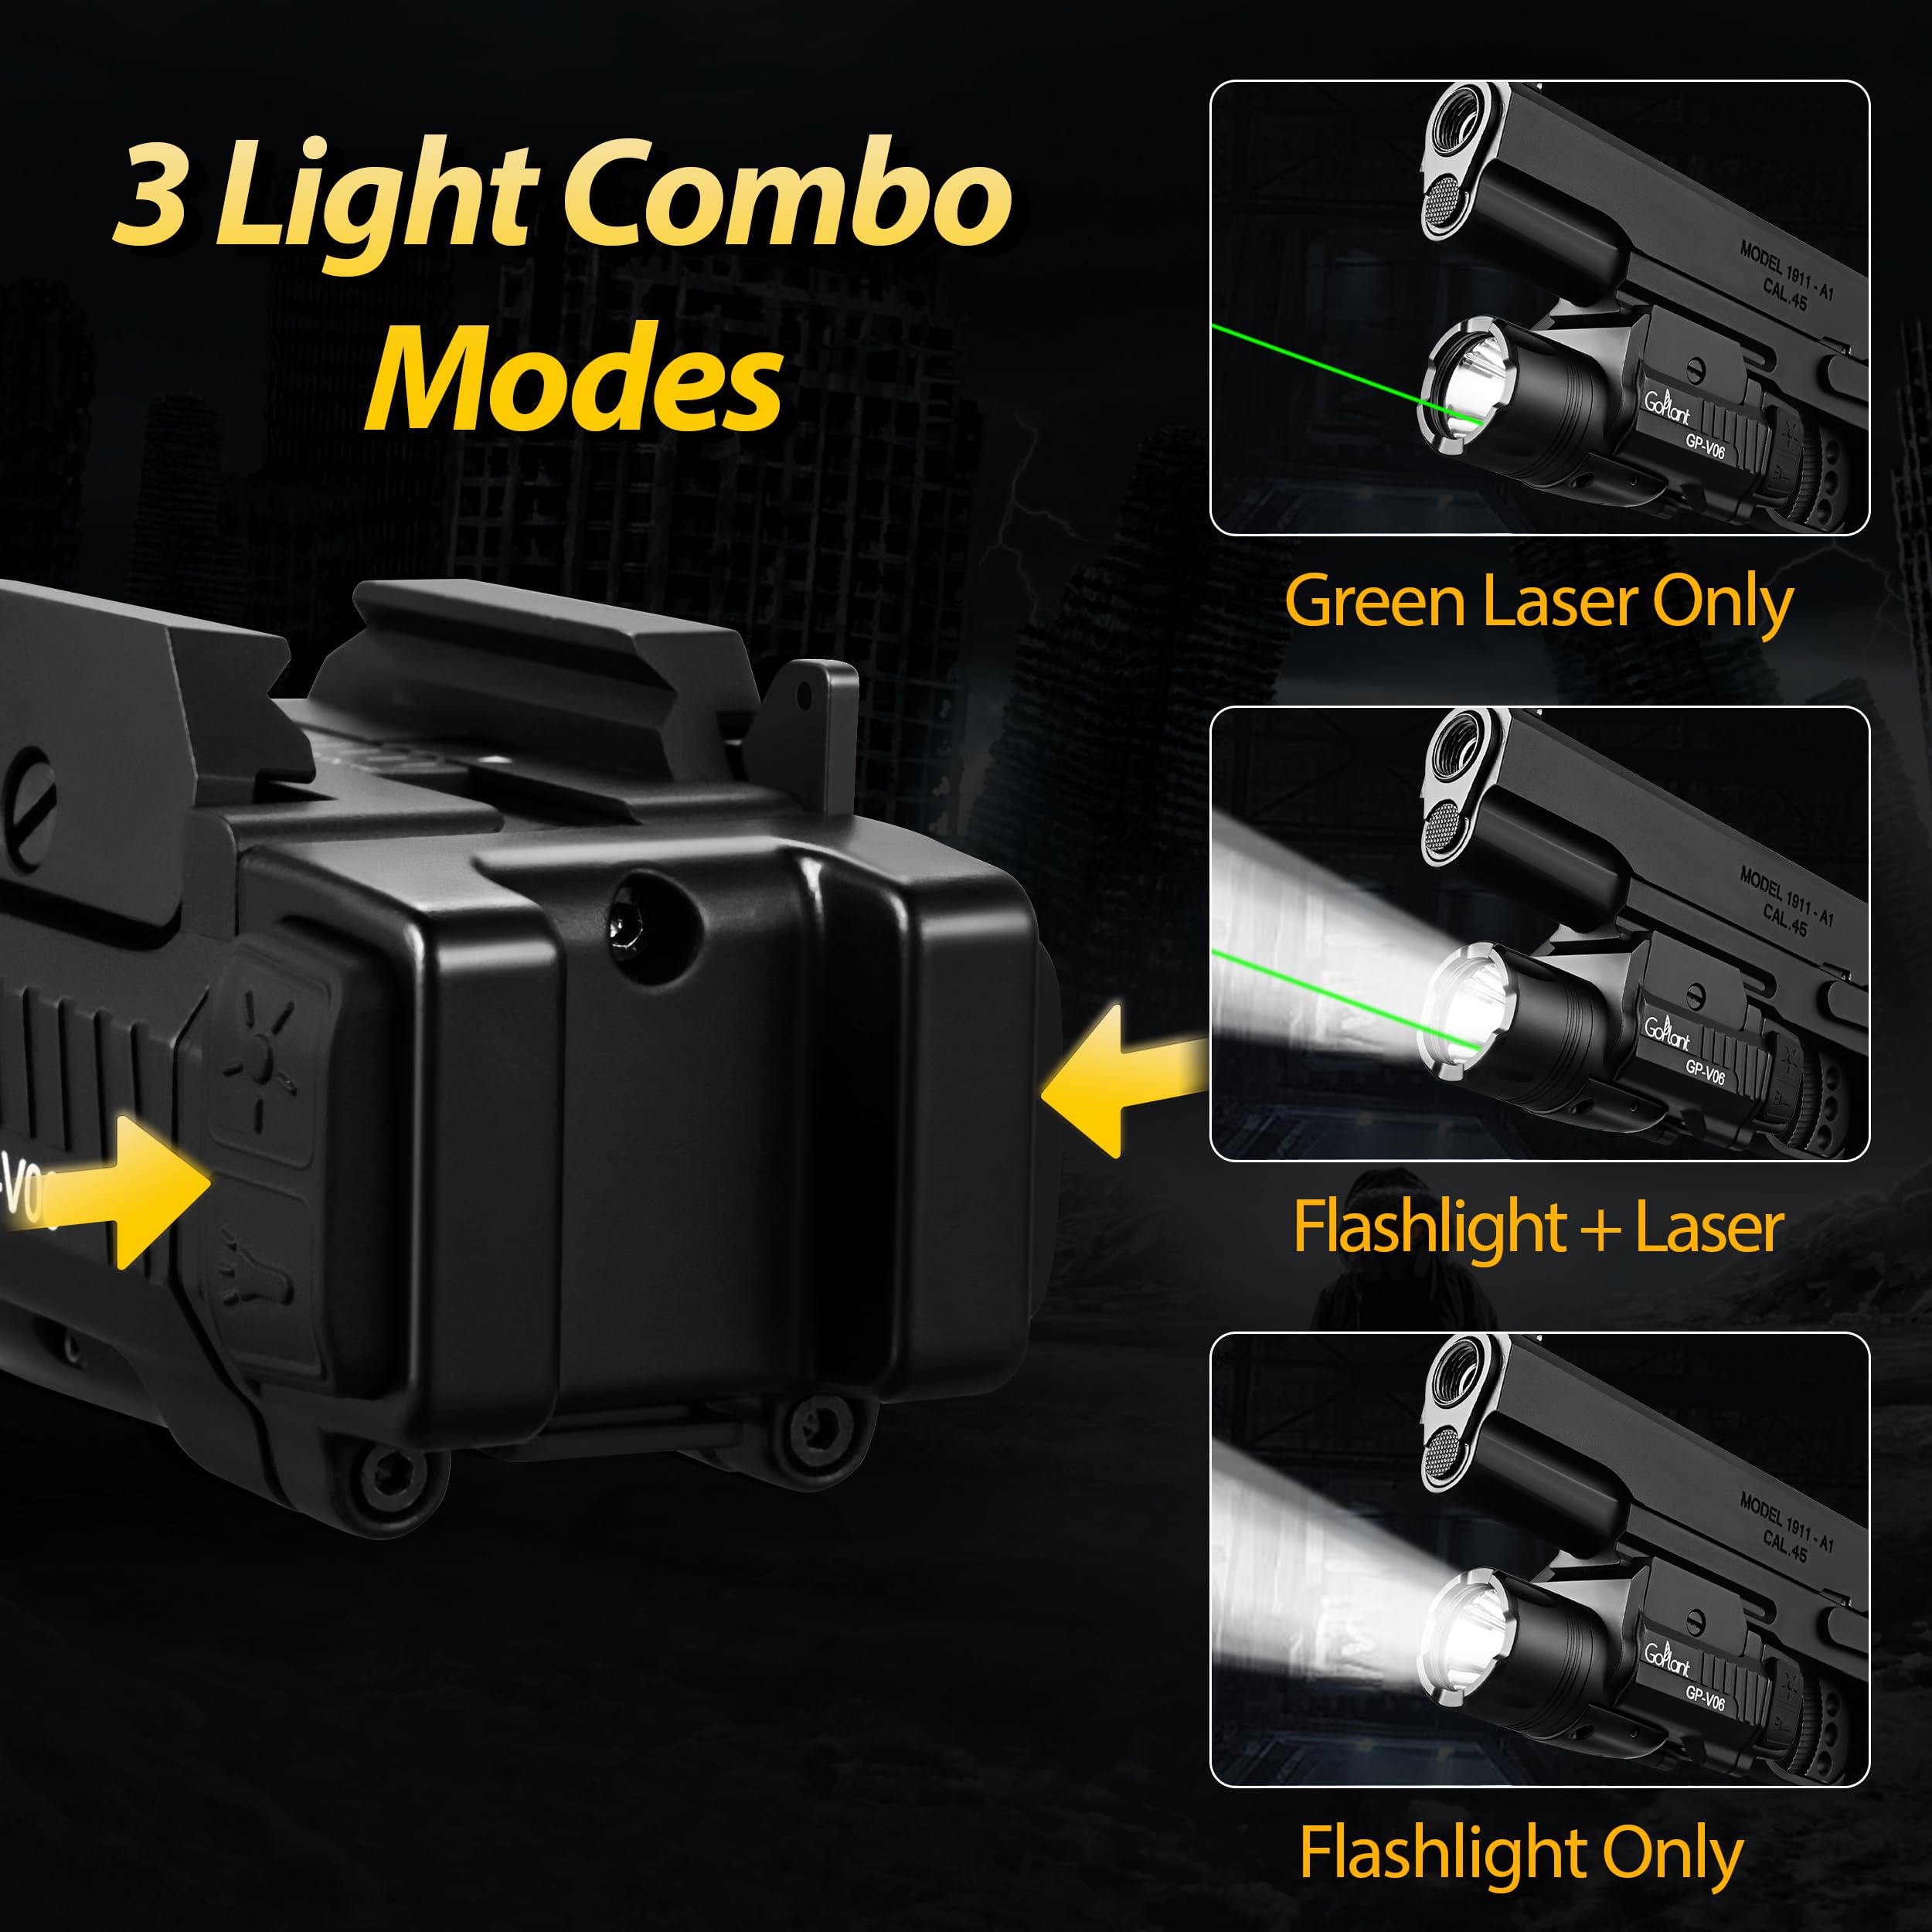 GOPLANT 1300 Lumens Weapon Laser Light, Battery Powered Adjustable Rail-Mounted LED Light and Green Laser Combo, Rifle LED Tactical Flashlight (Using Batteries)